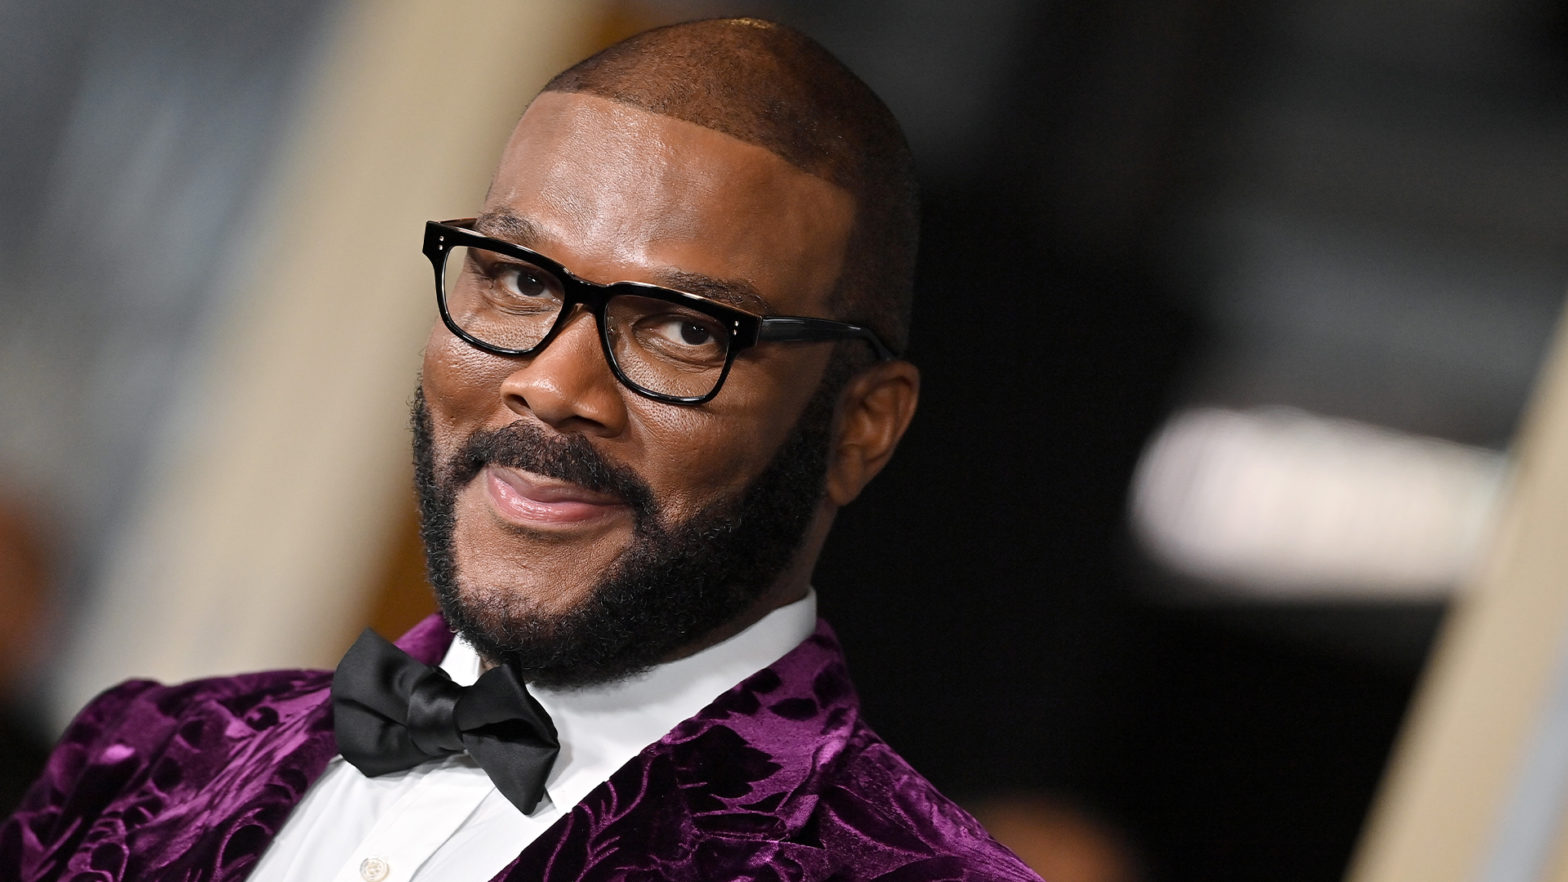 Tyler Perry On His Bid For The BET Network — 'I’m Very, Very Interested In Taking As Much Of It As I Can'